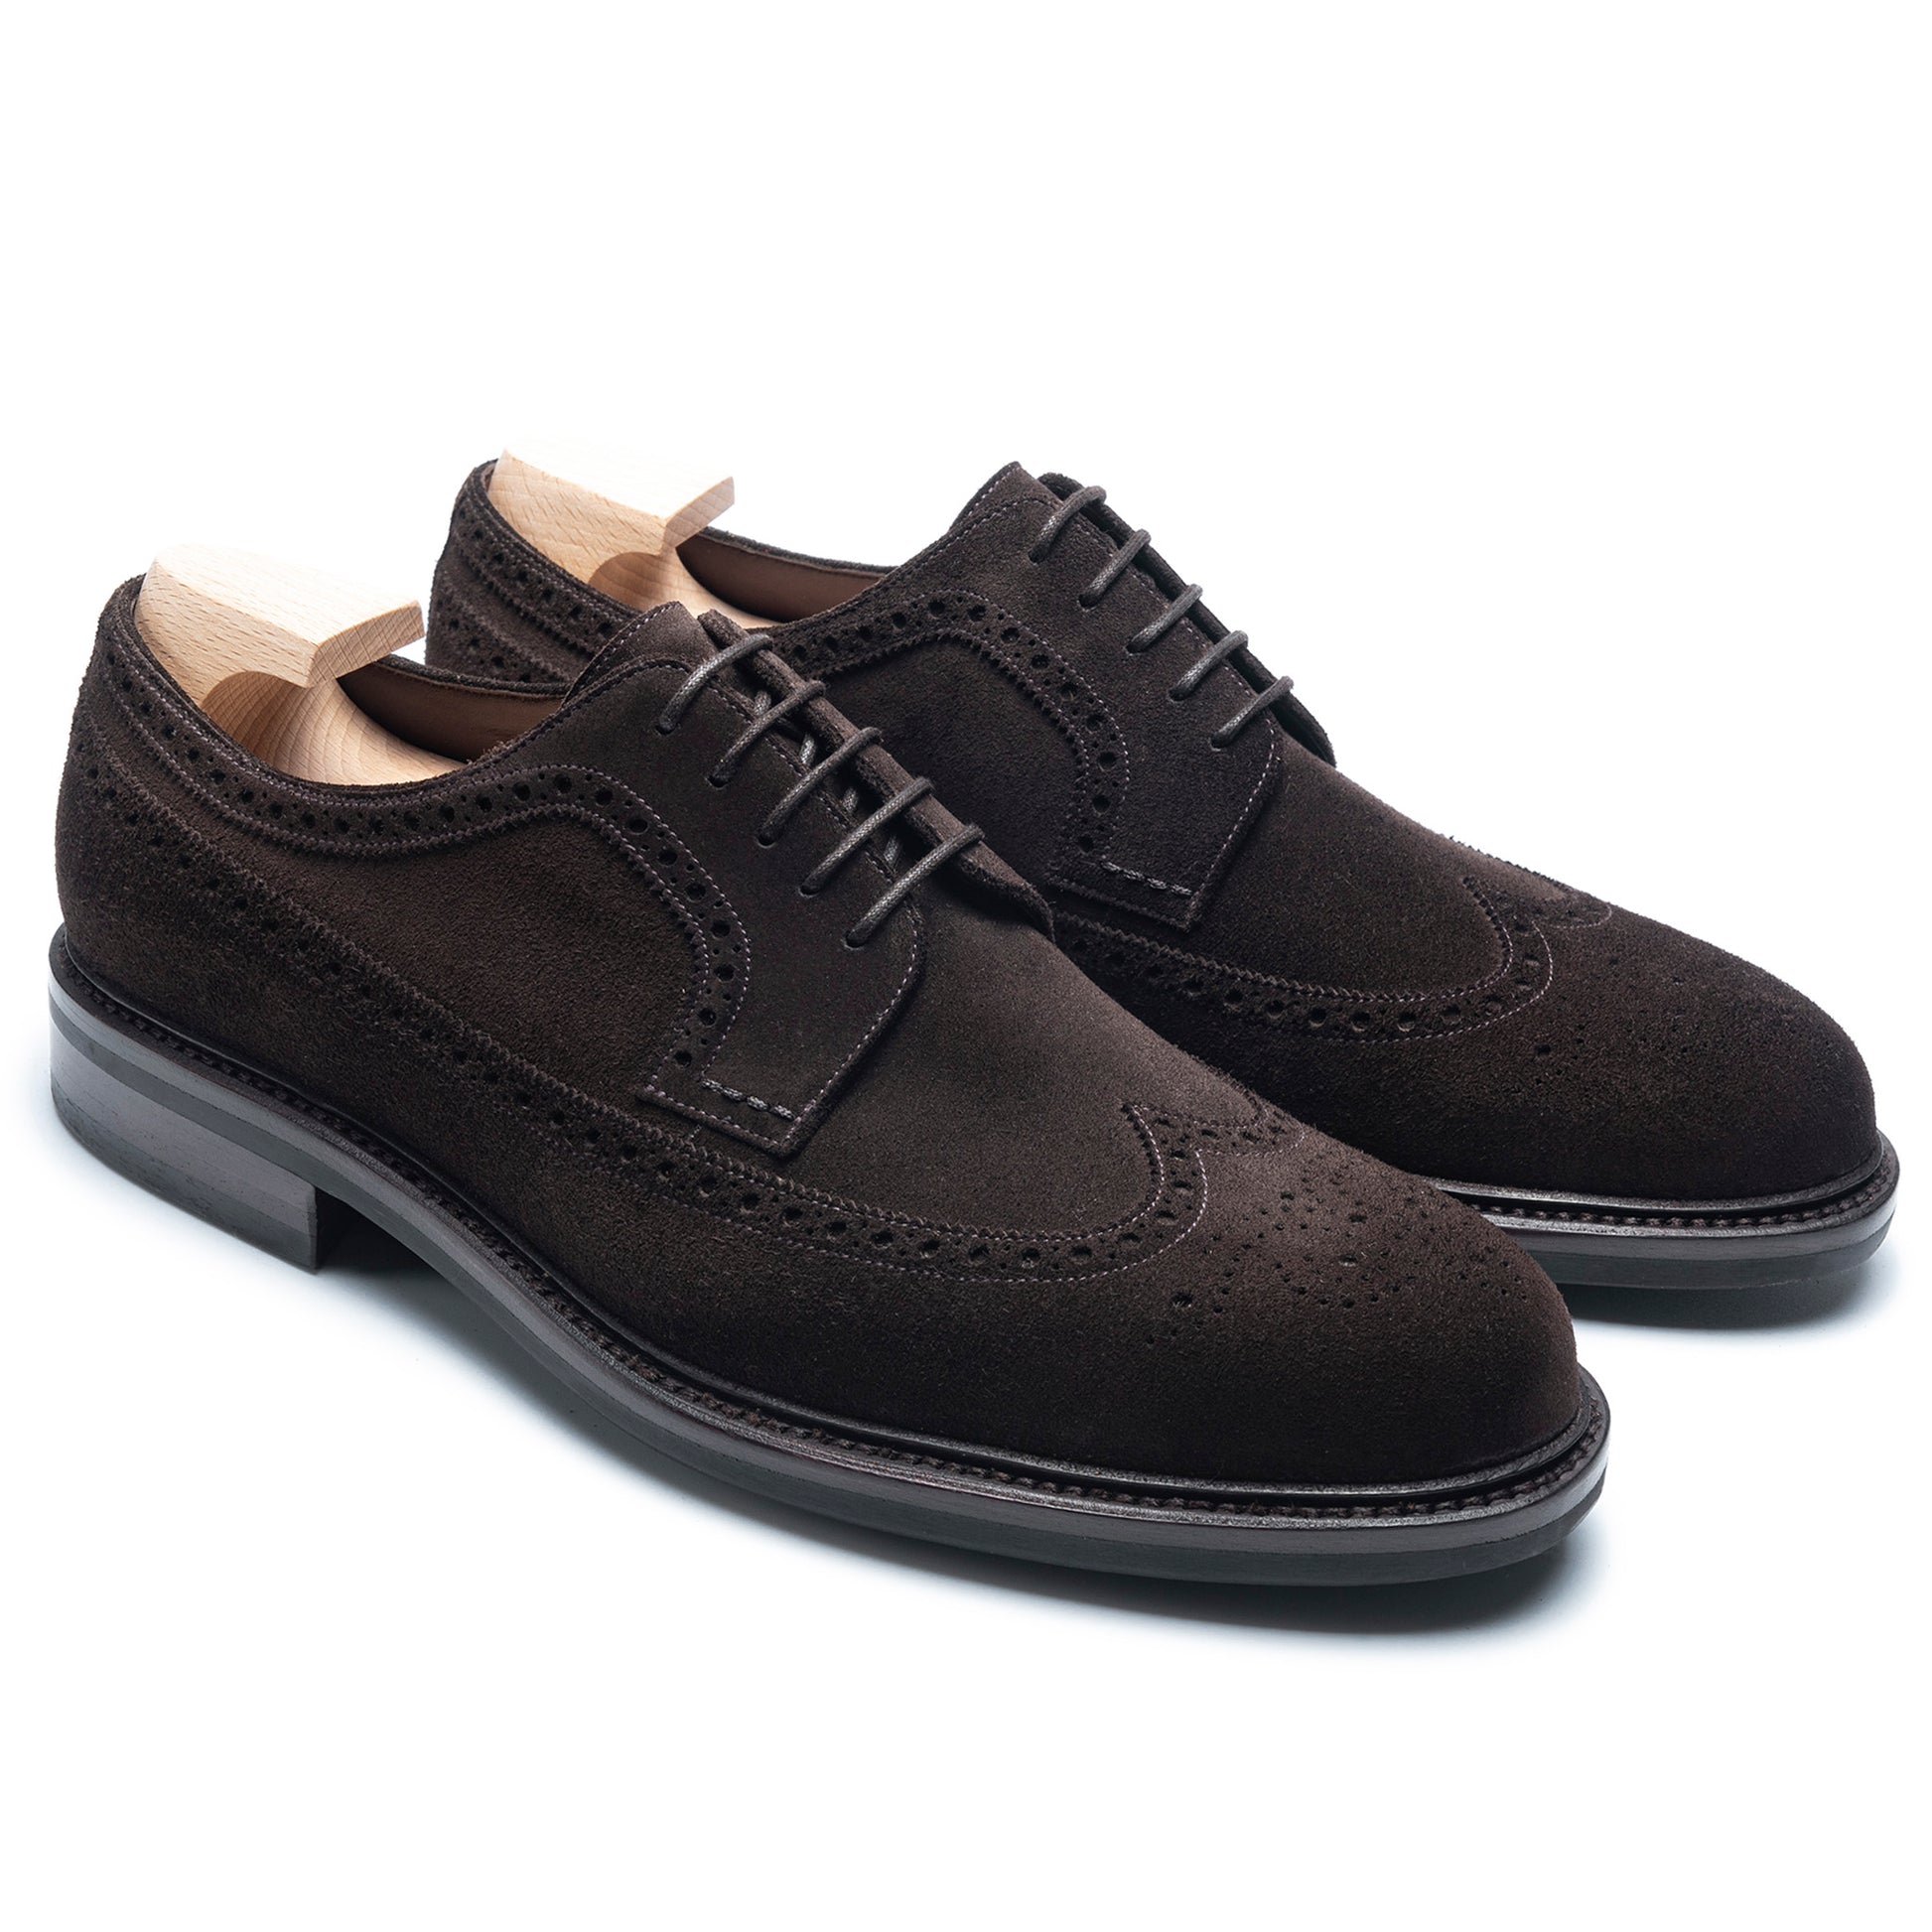 TLB Mallorca leather shoes 677 / MADISON / ANTE BROWN